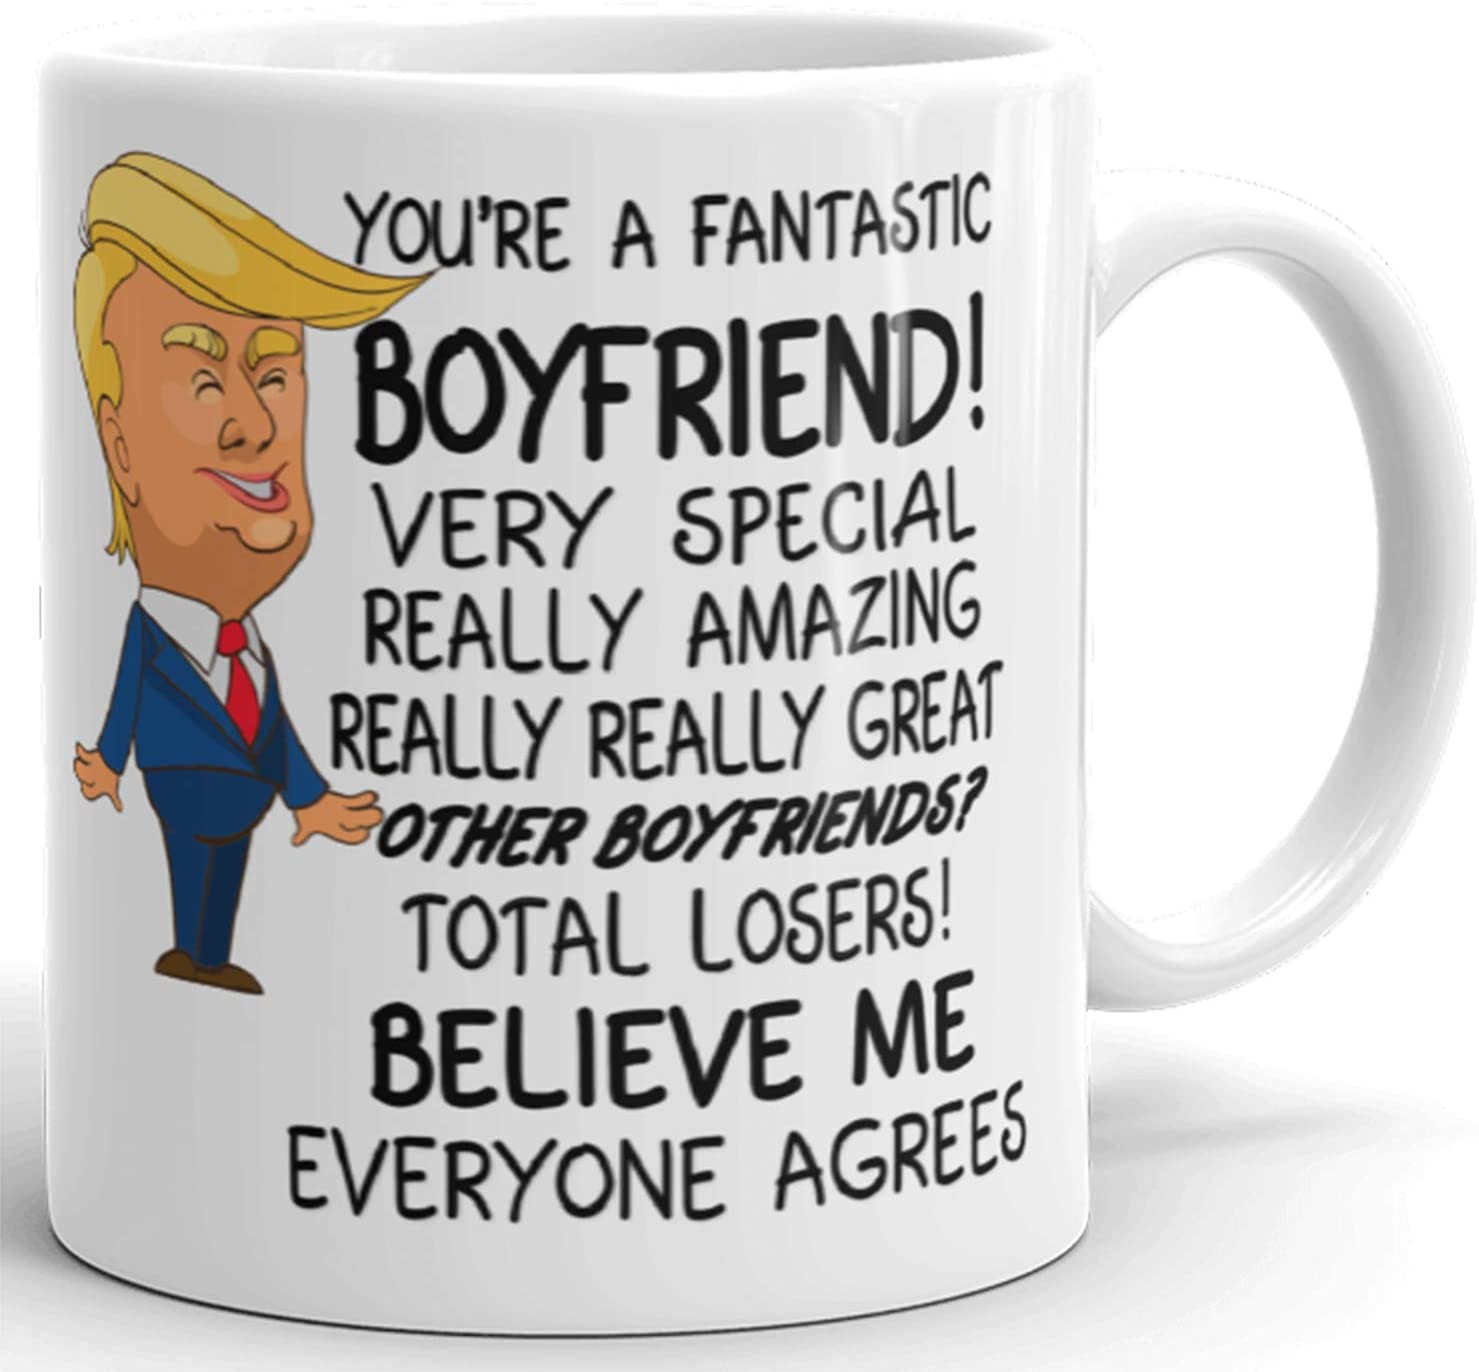 You're a Fantastic Boyfriend - Valentines Day Donald Trump Prank Gift Mug - Novelty Ceramic Coffee Mug - Funny Gifts for Him and Her - Gag Birthday Present Idea From Girlfriend - 11 Fl. Oz White